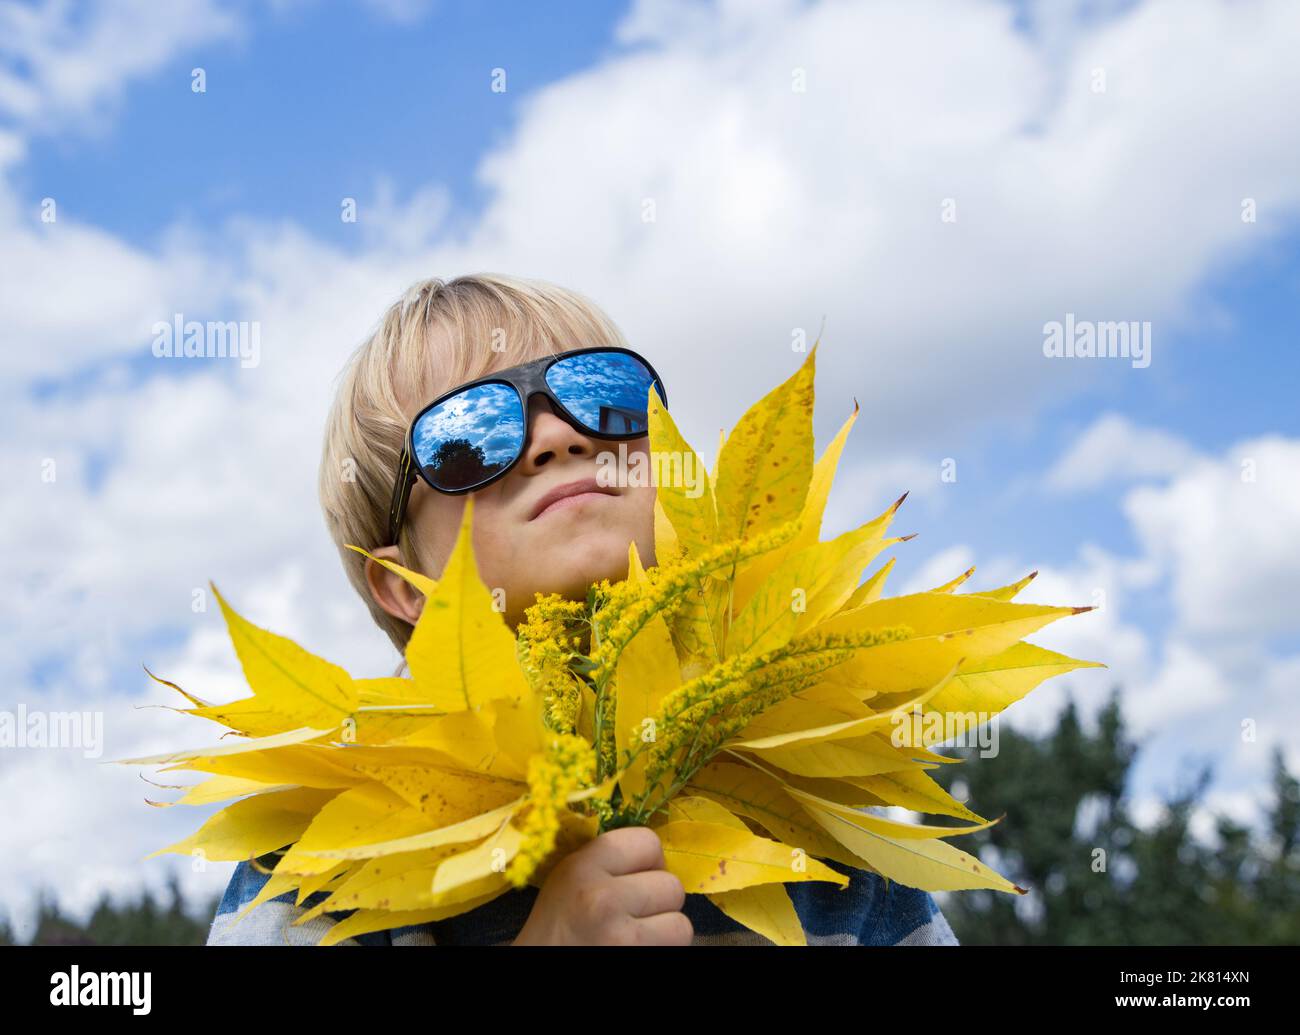 On sunny day against blue sky, 5-year-old boy in sunglasses holds bouquet of yellow autumn leaves in hands. Ukrainians want peace. Stop the war. suppo Stock Photo